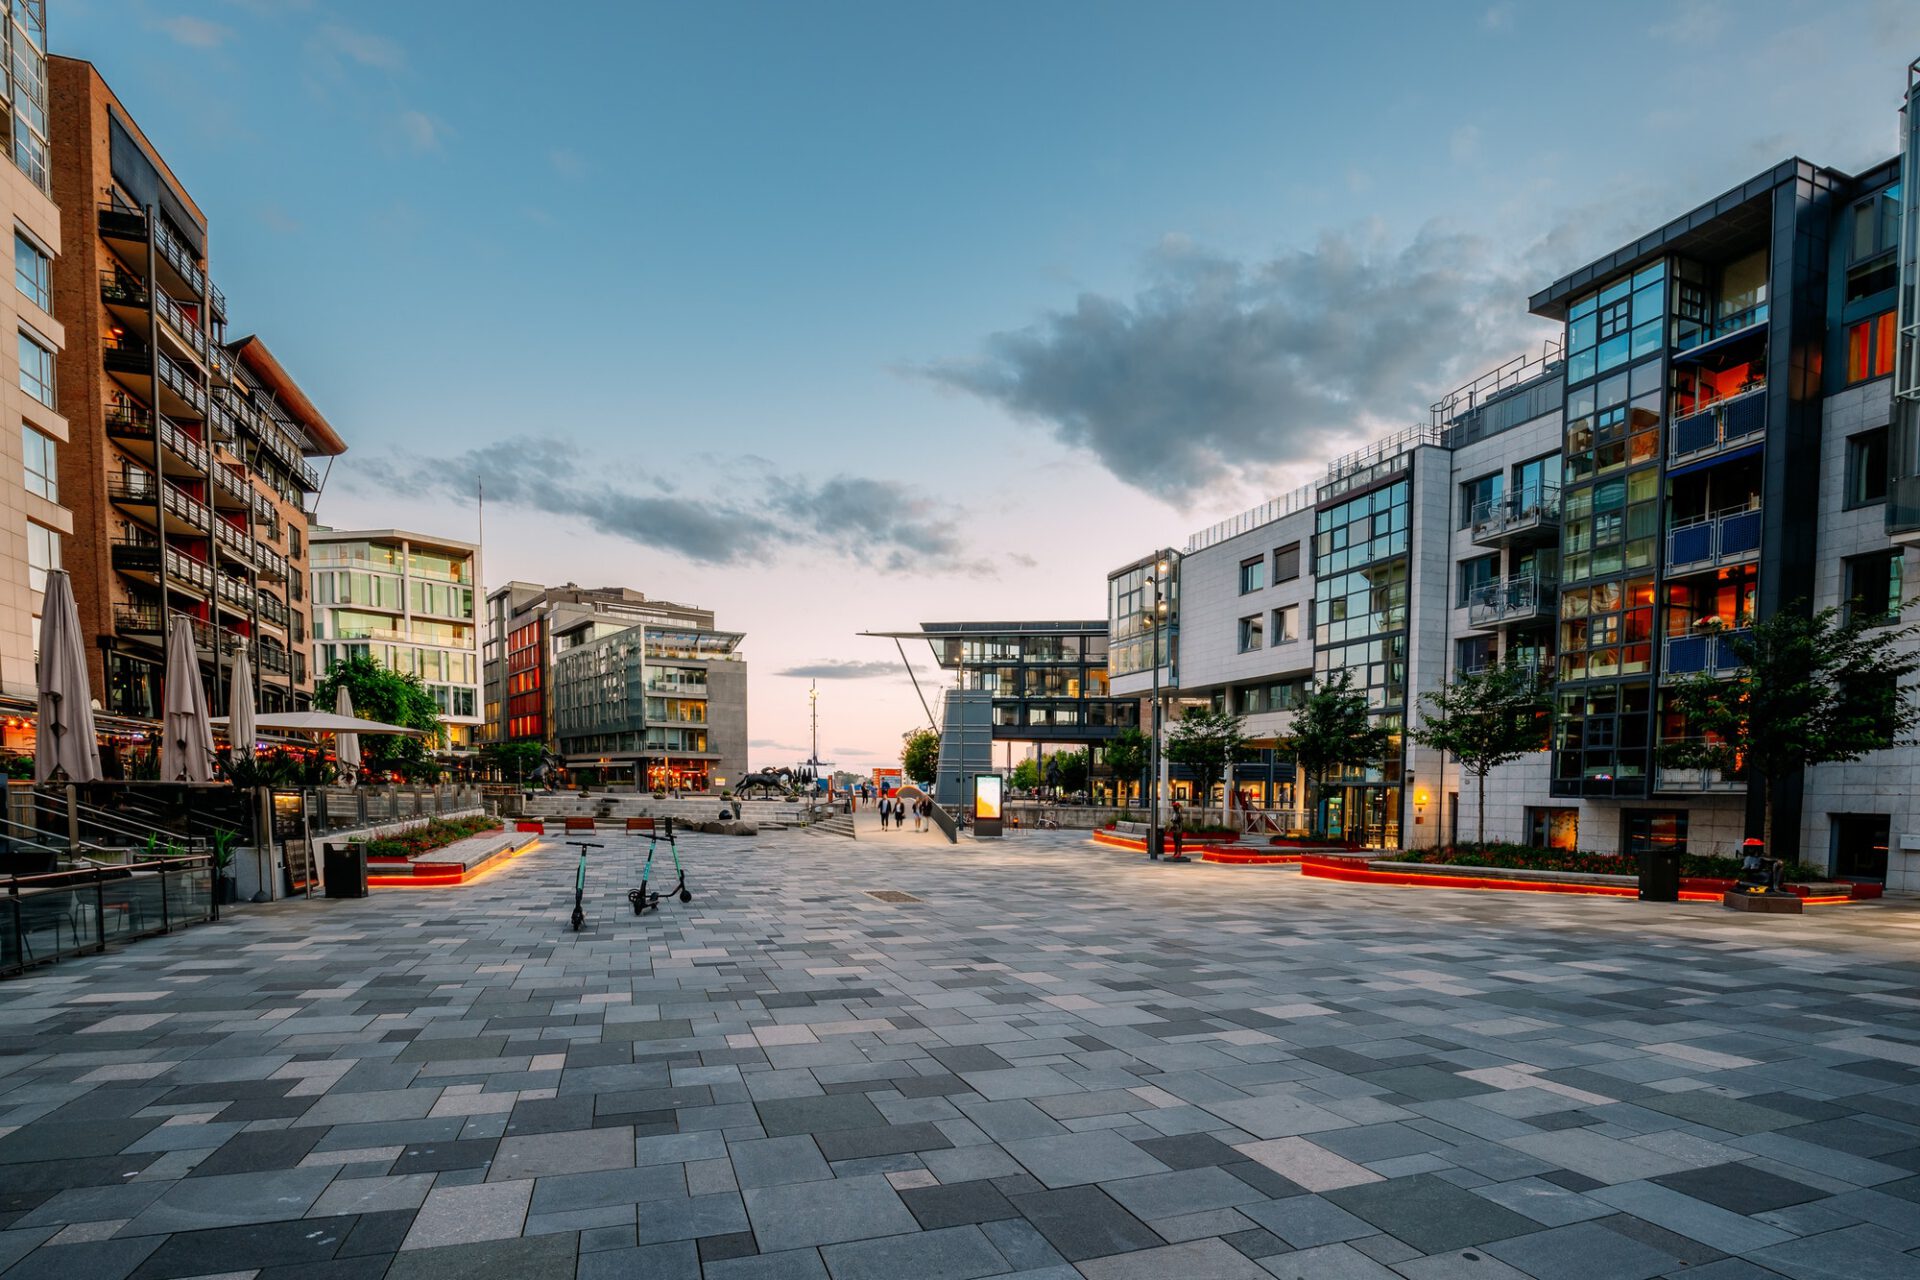 Oslo, Norway. Residential Multi-storey Houses In Aker Brygge District In Summer Evening. Famous And